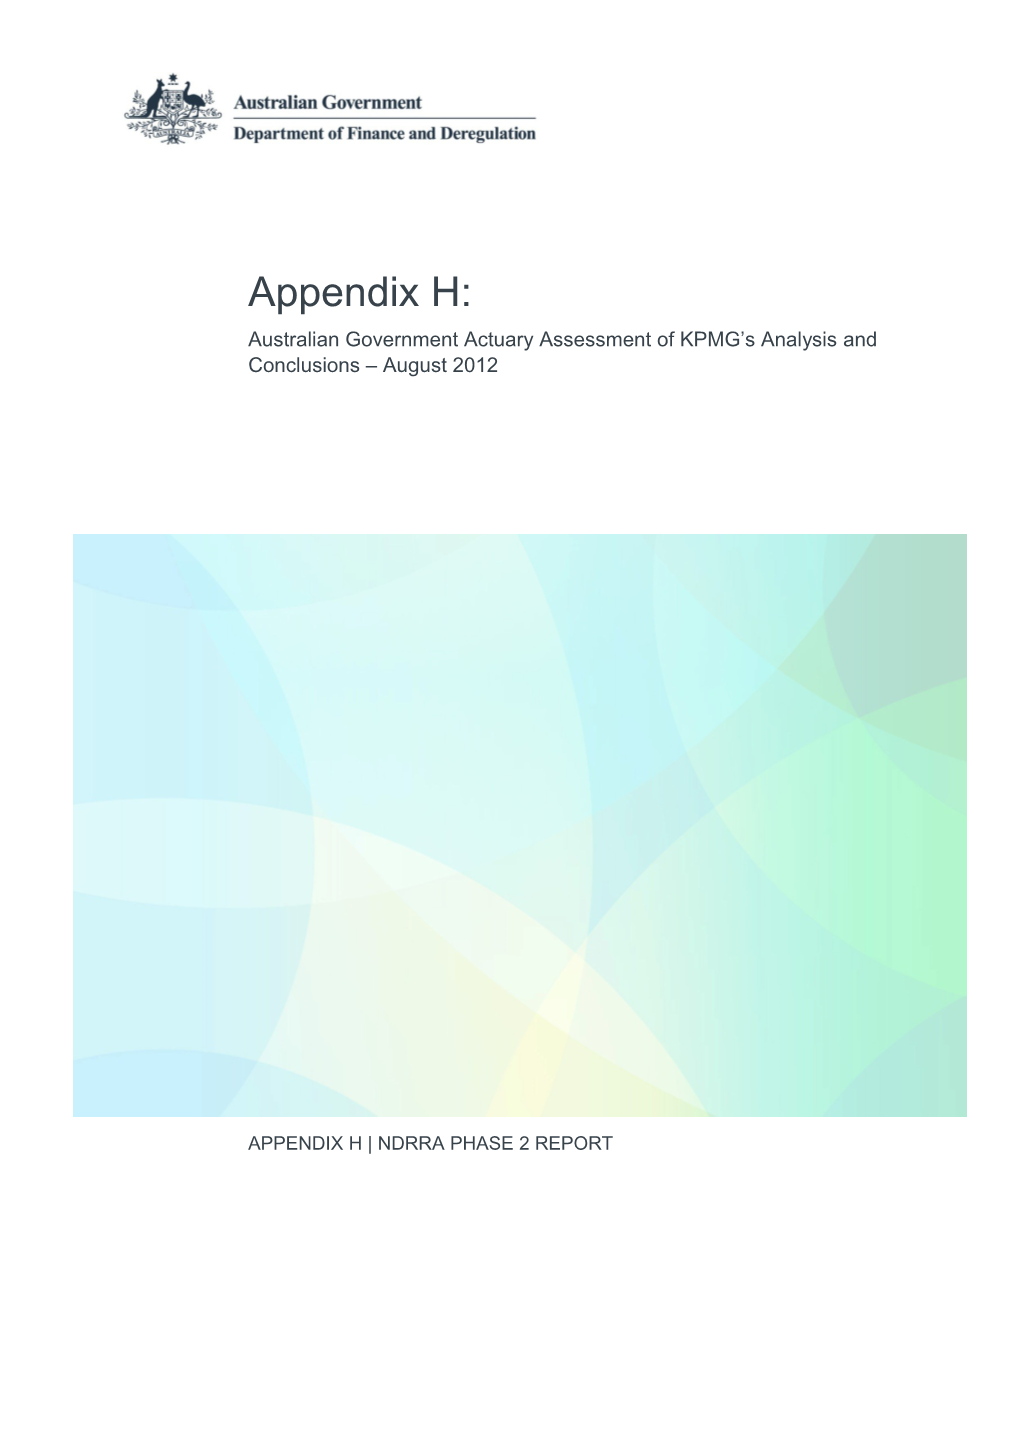 Appendix H - Australian Government Actuary Assessment of KPMG S Analysis and Conclusions